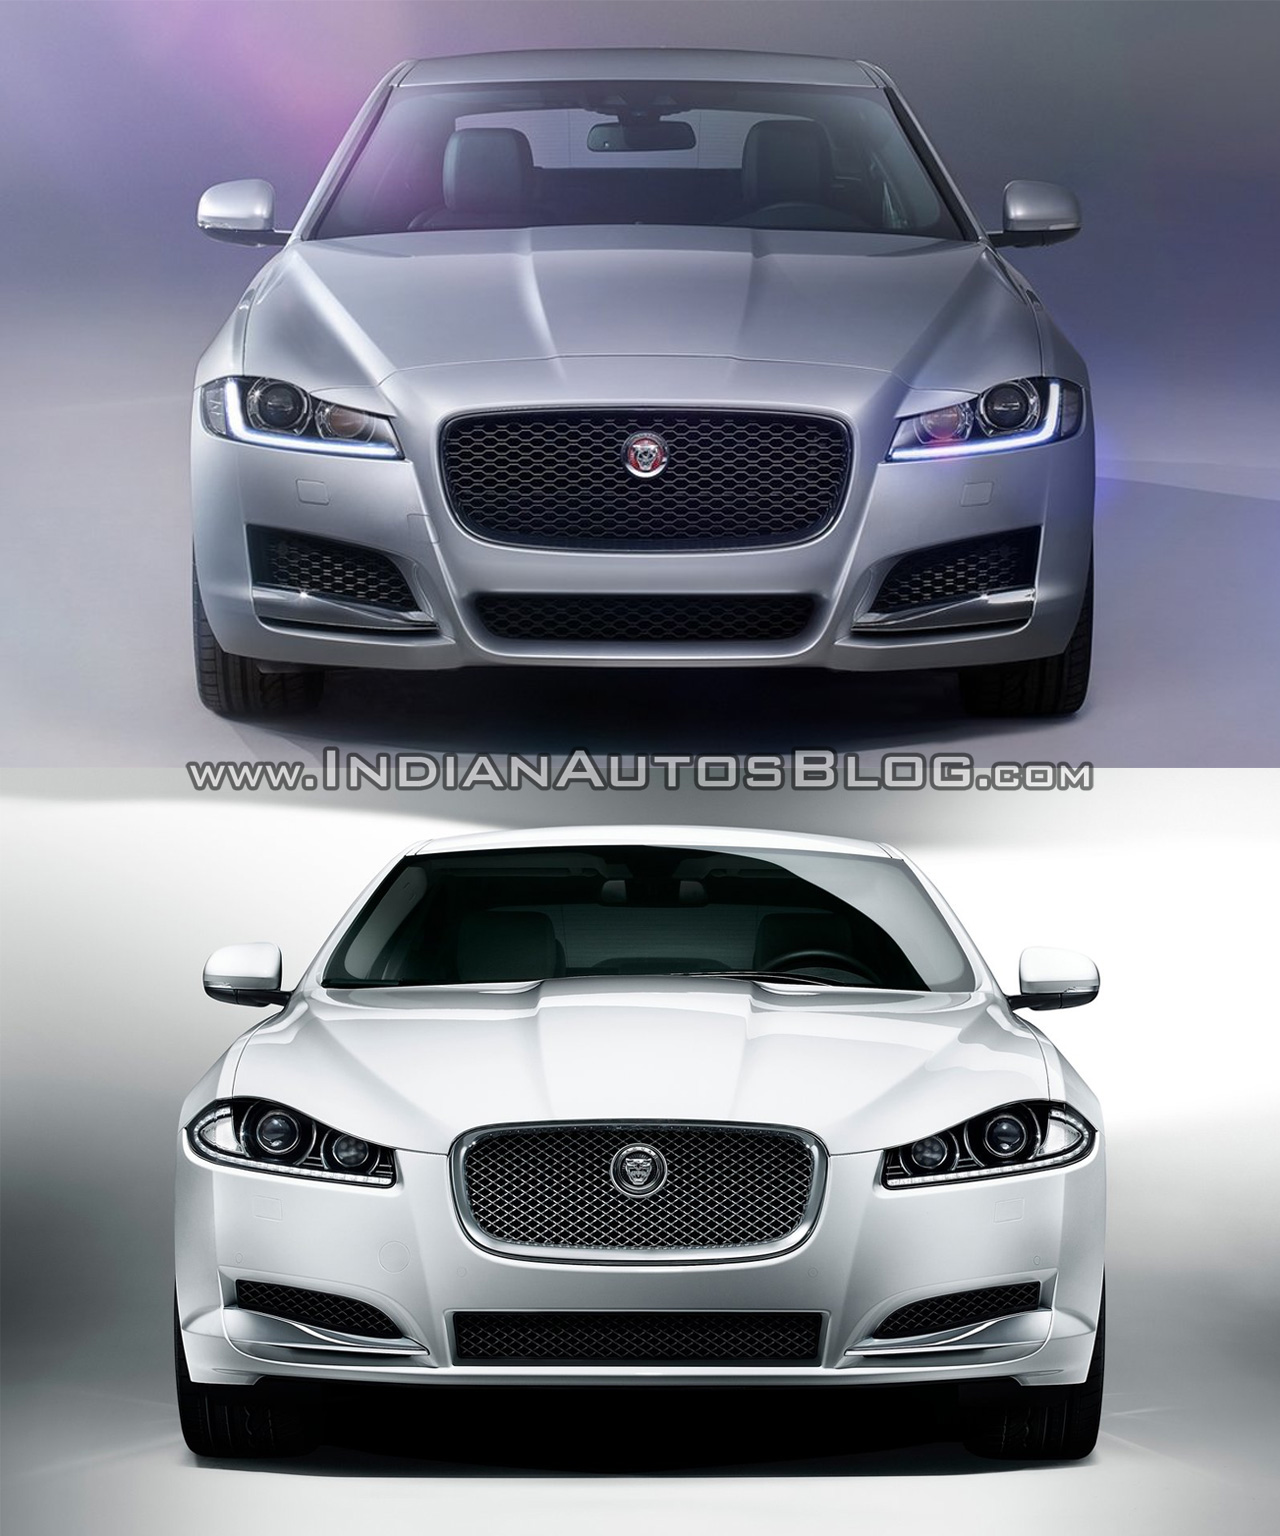 2016 jaguar xf vs 2012 jaguar xf old vs new 2016 jaguar xf vs 2012 jaguar xf old